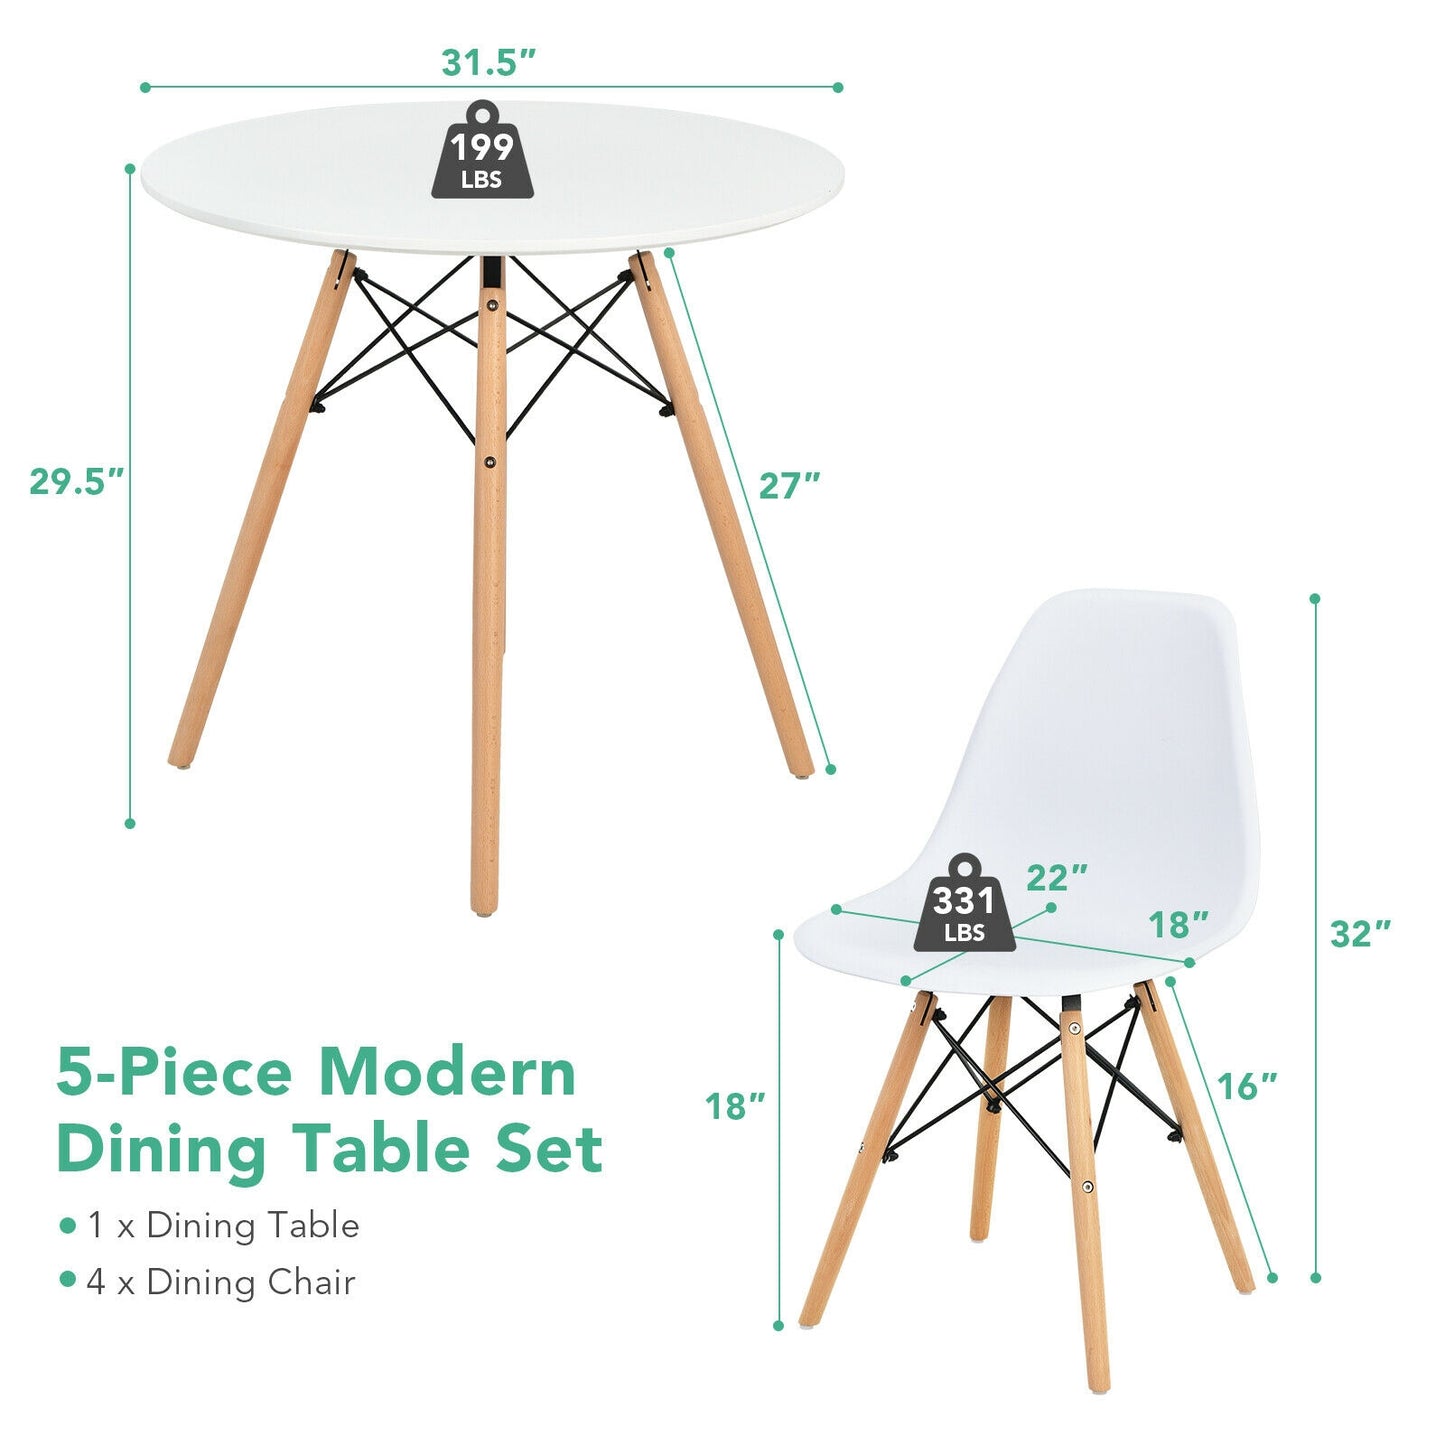 5 Pieces Table Set With Solid Wood Leg For Dining Room-White